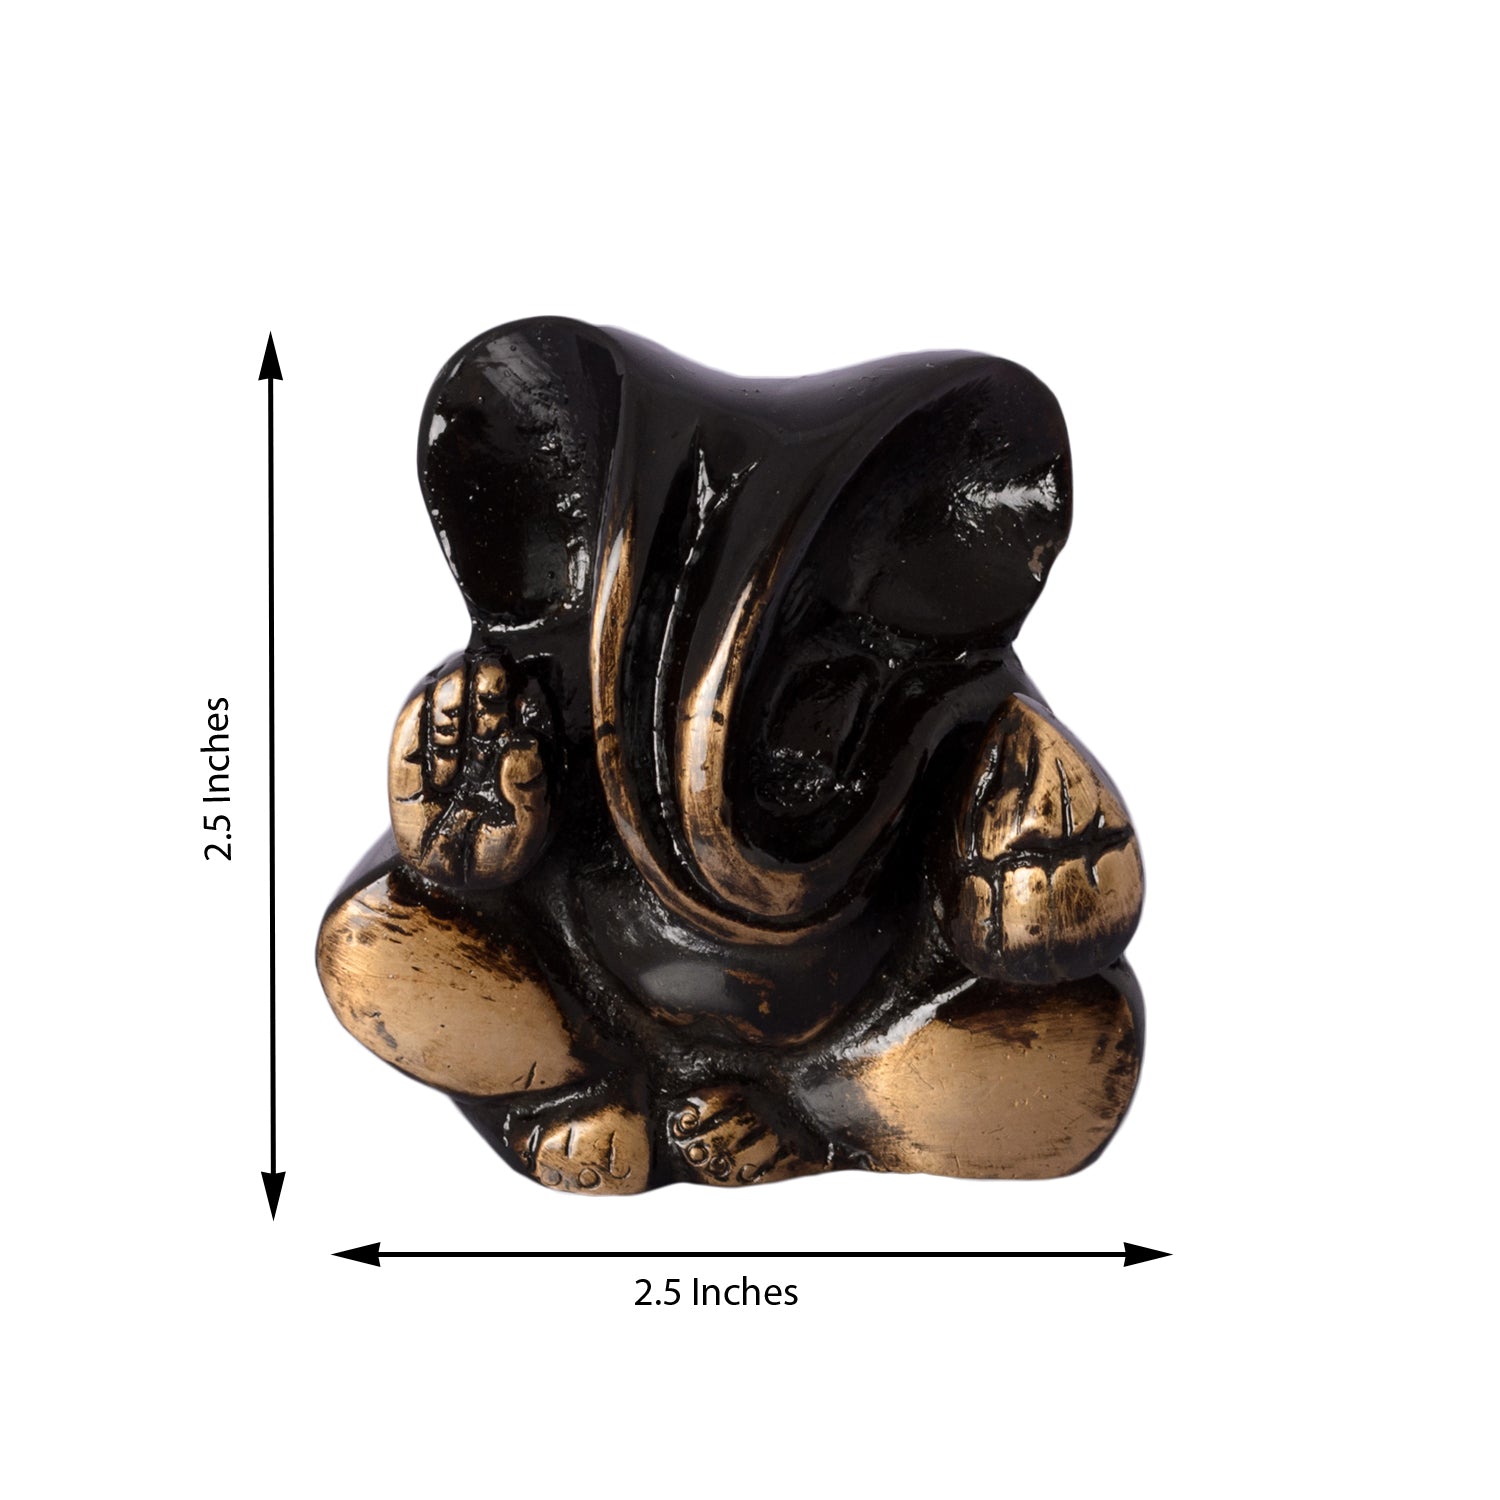 Brass Diving Appu Lord Ganesha Idol For Home 2